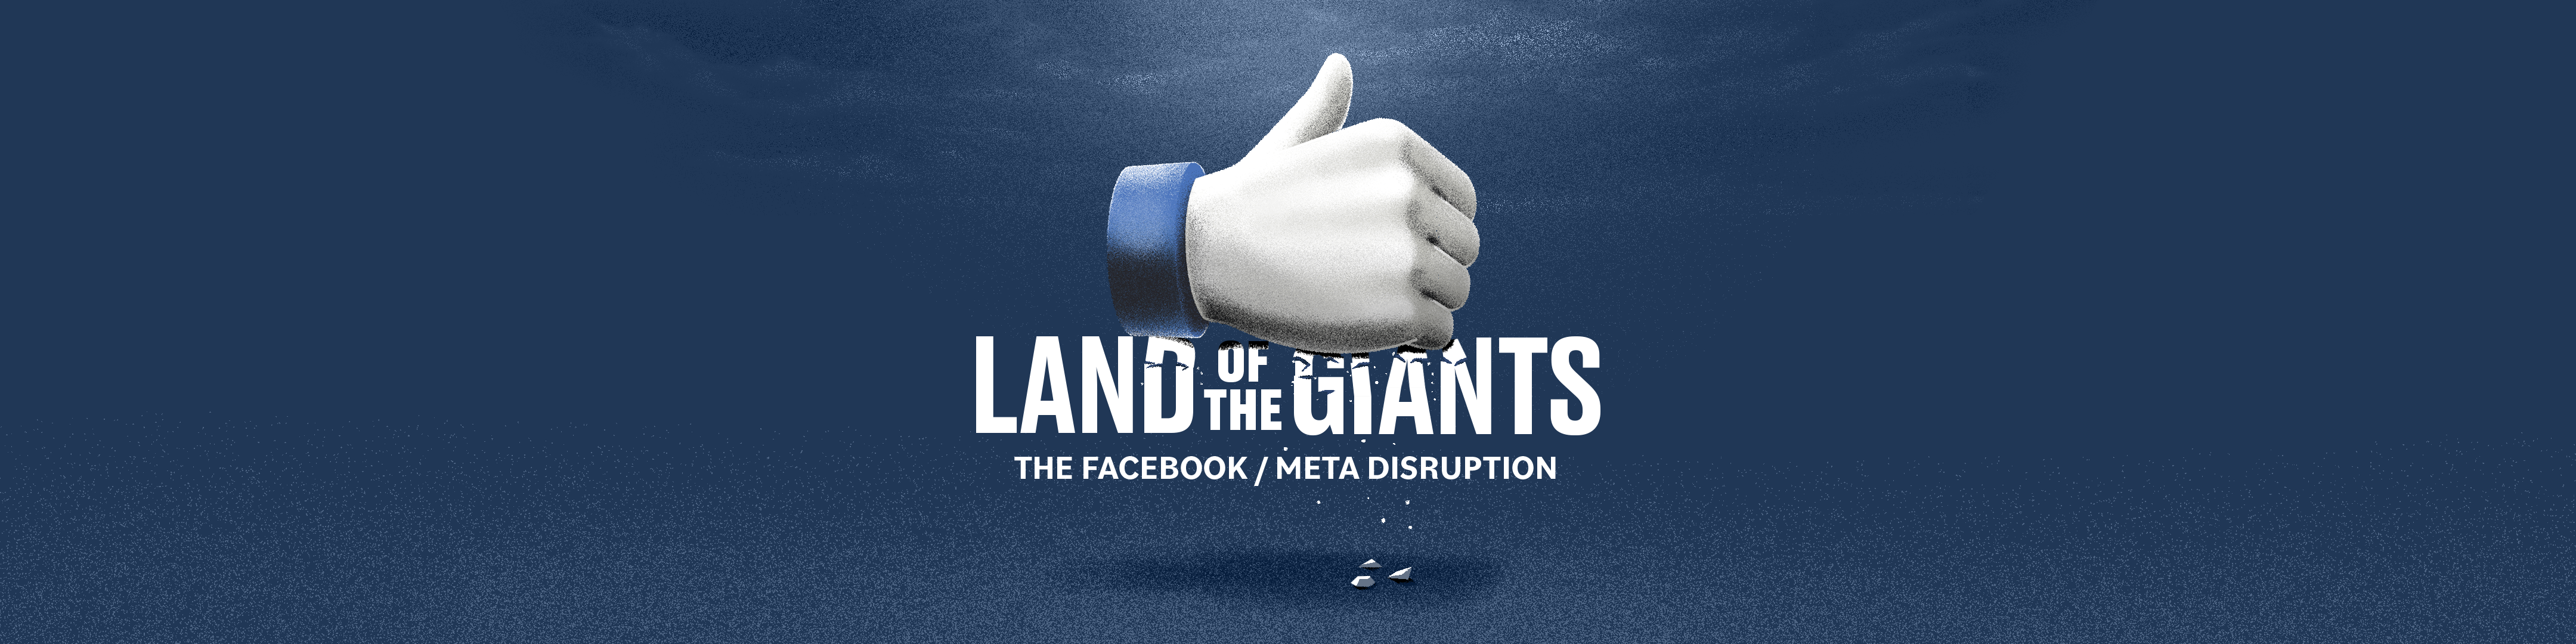 Land of the Giants: The Facebook/Meta Disruption podcast artwork showing the series title and a hand giving a thumbs up in Facebook-like colors.